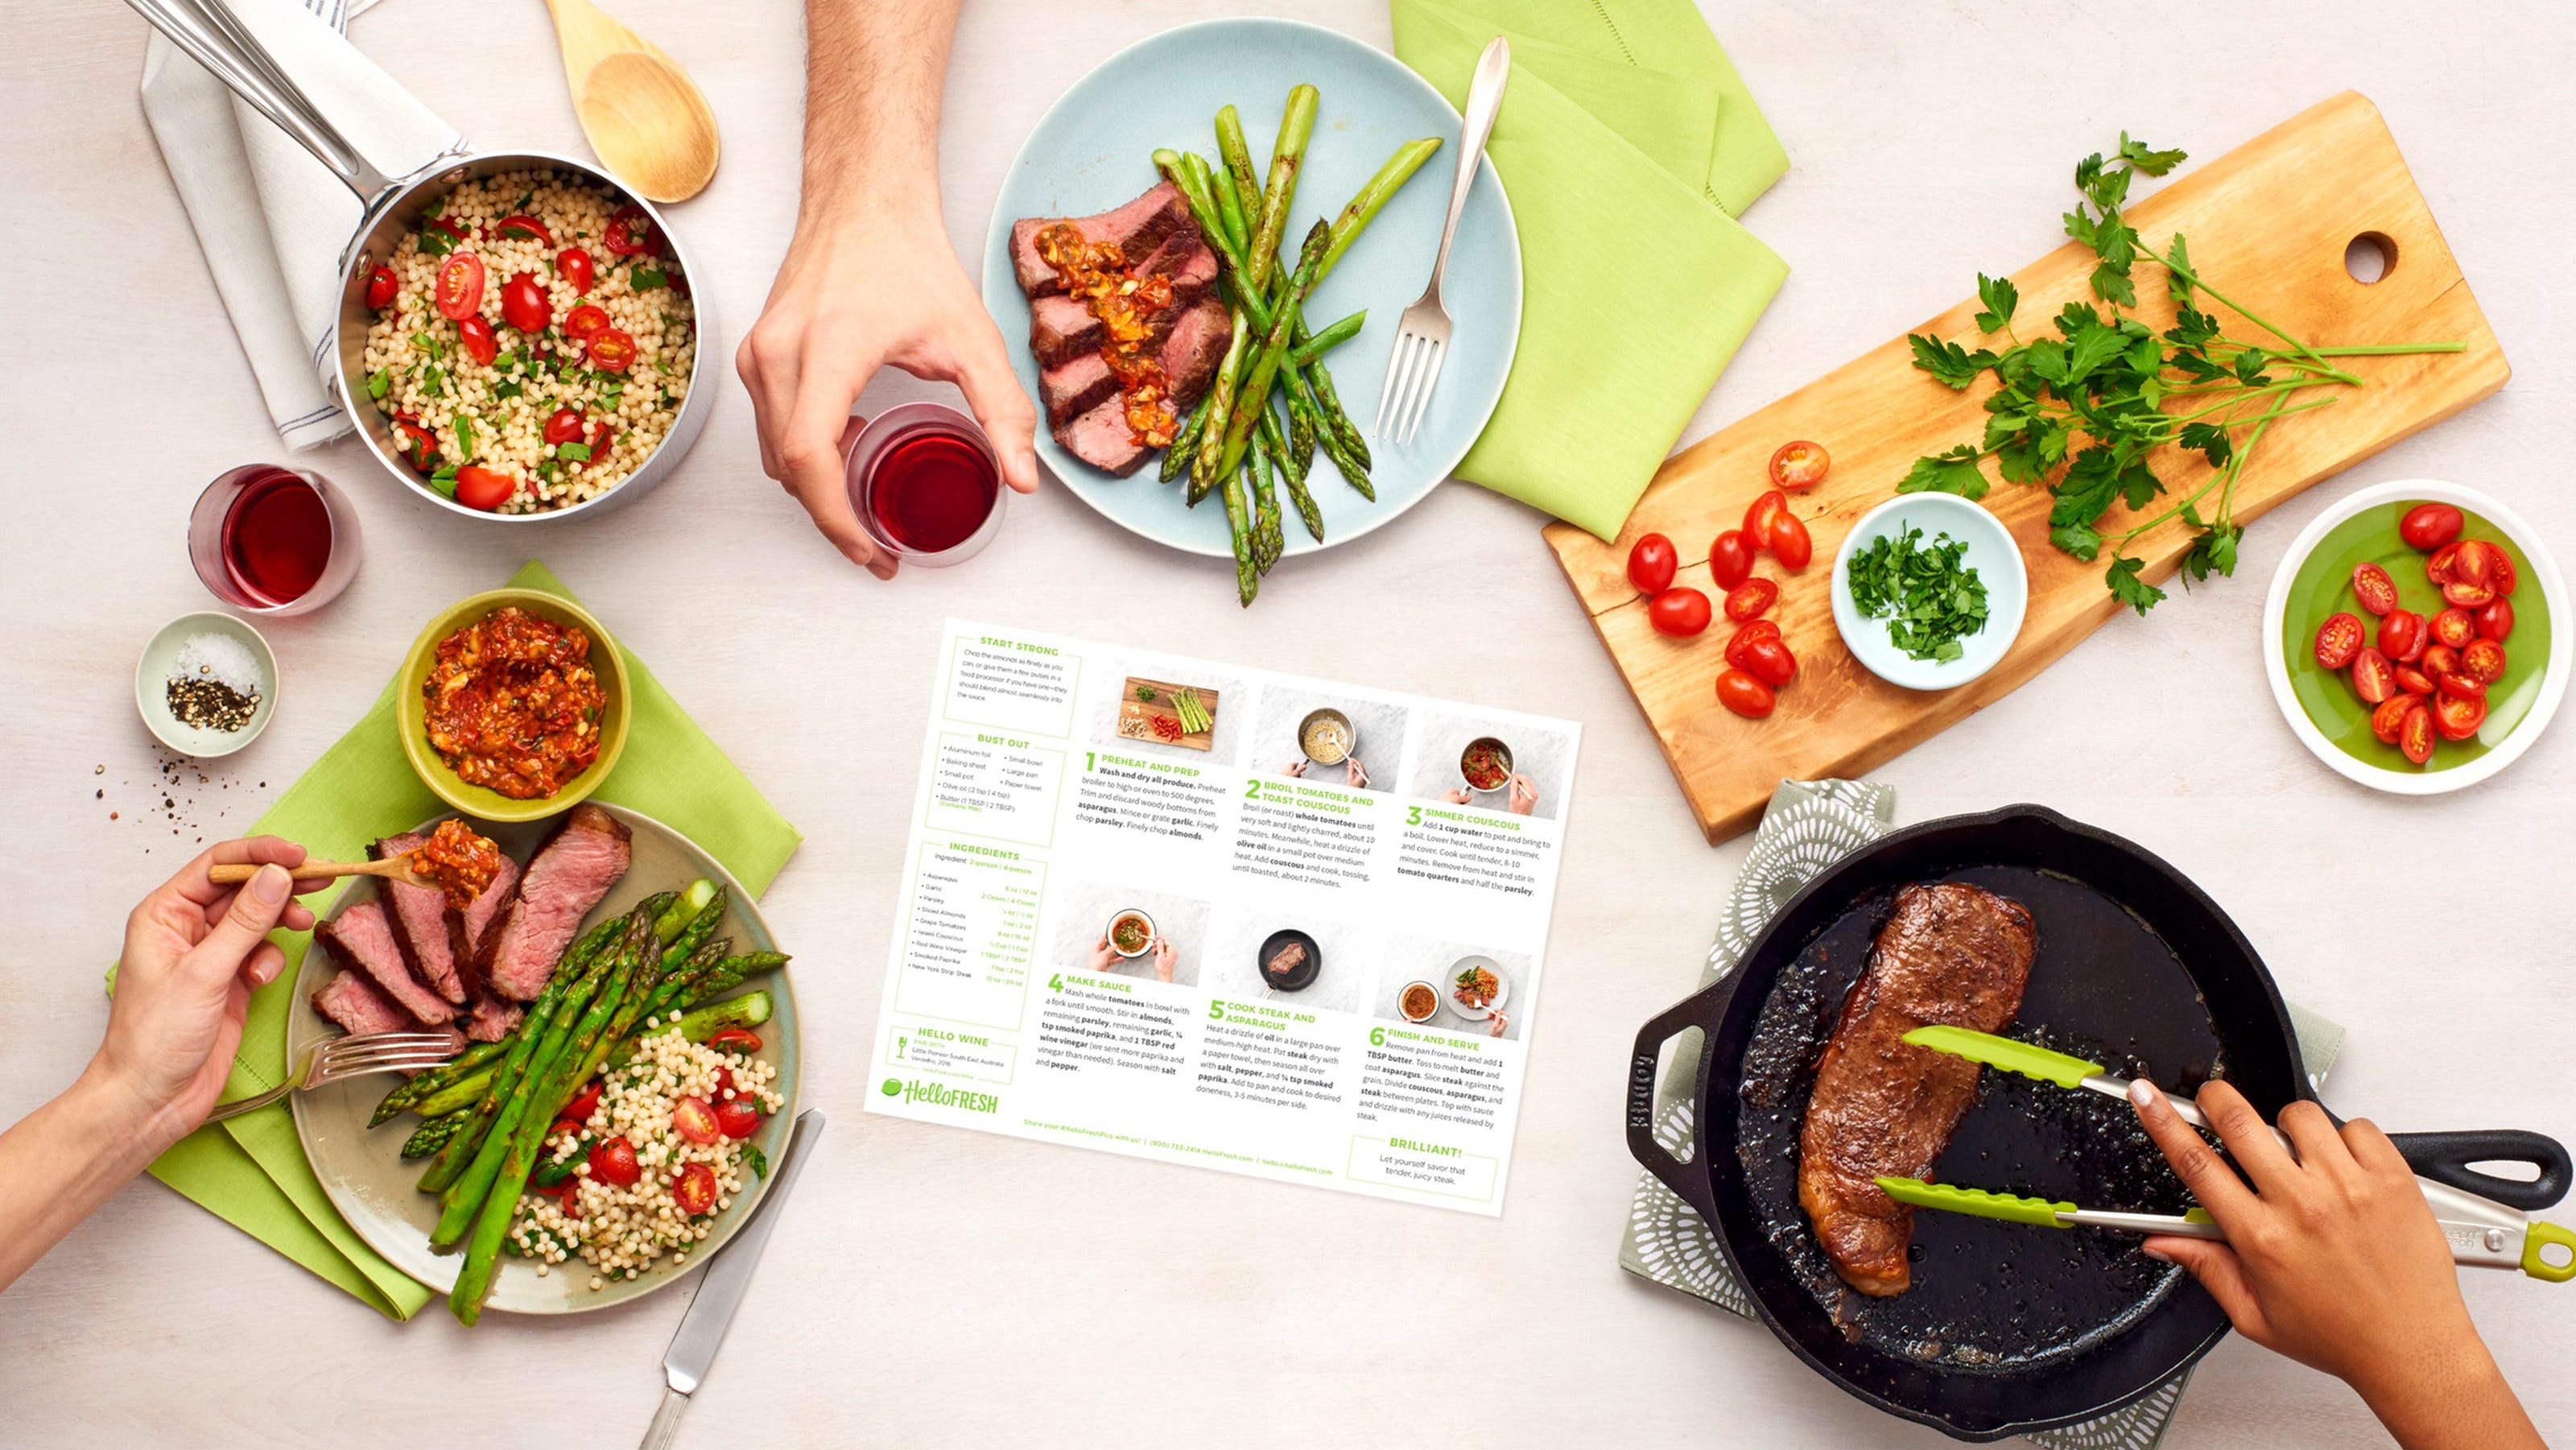 HelloFresh: Get 16 Free Meals with Coupon Code - wide 7